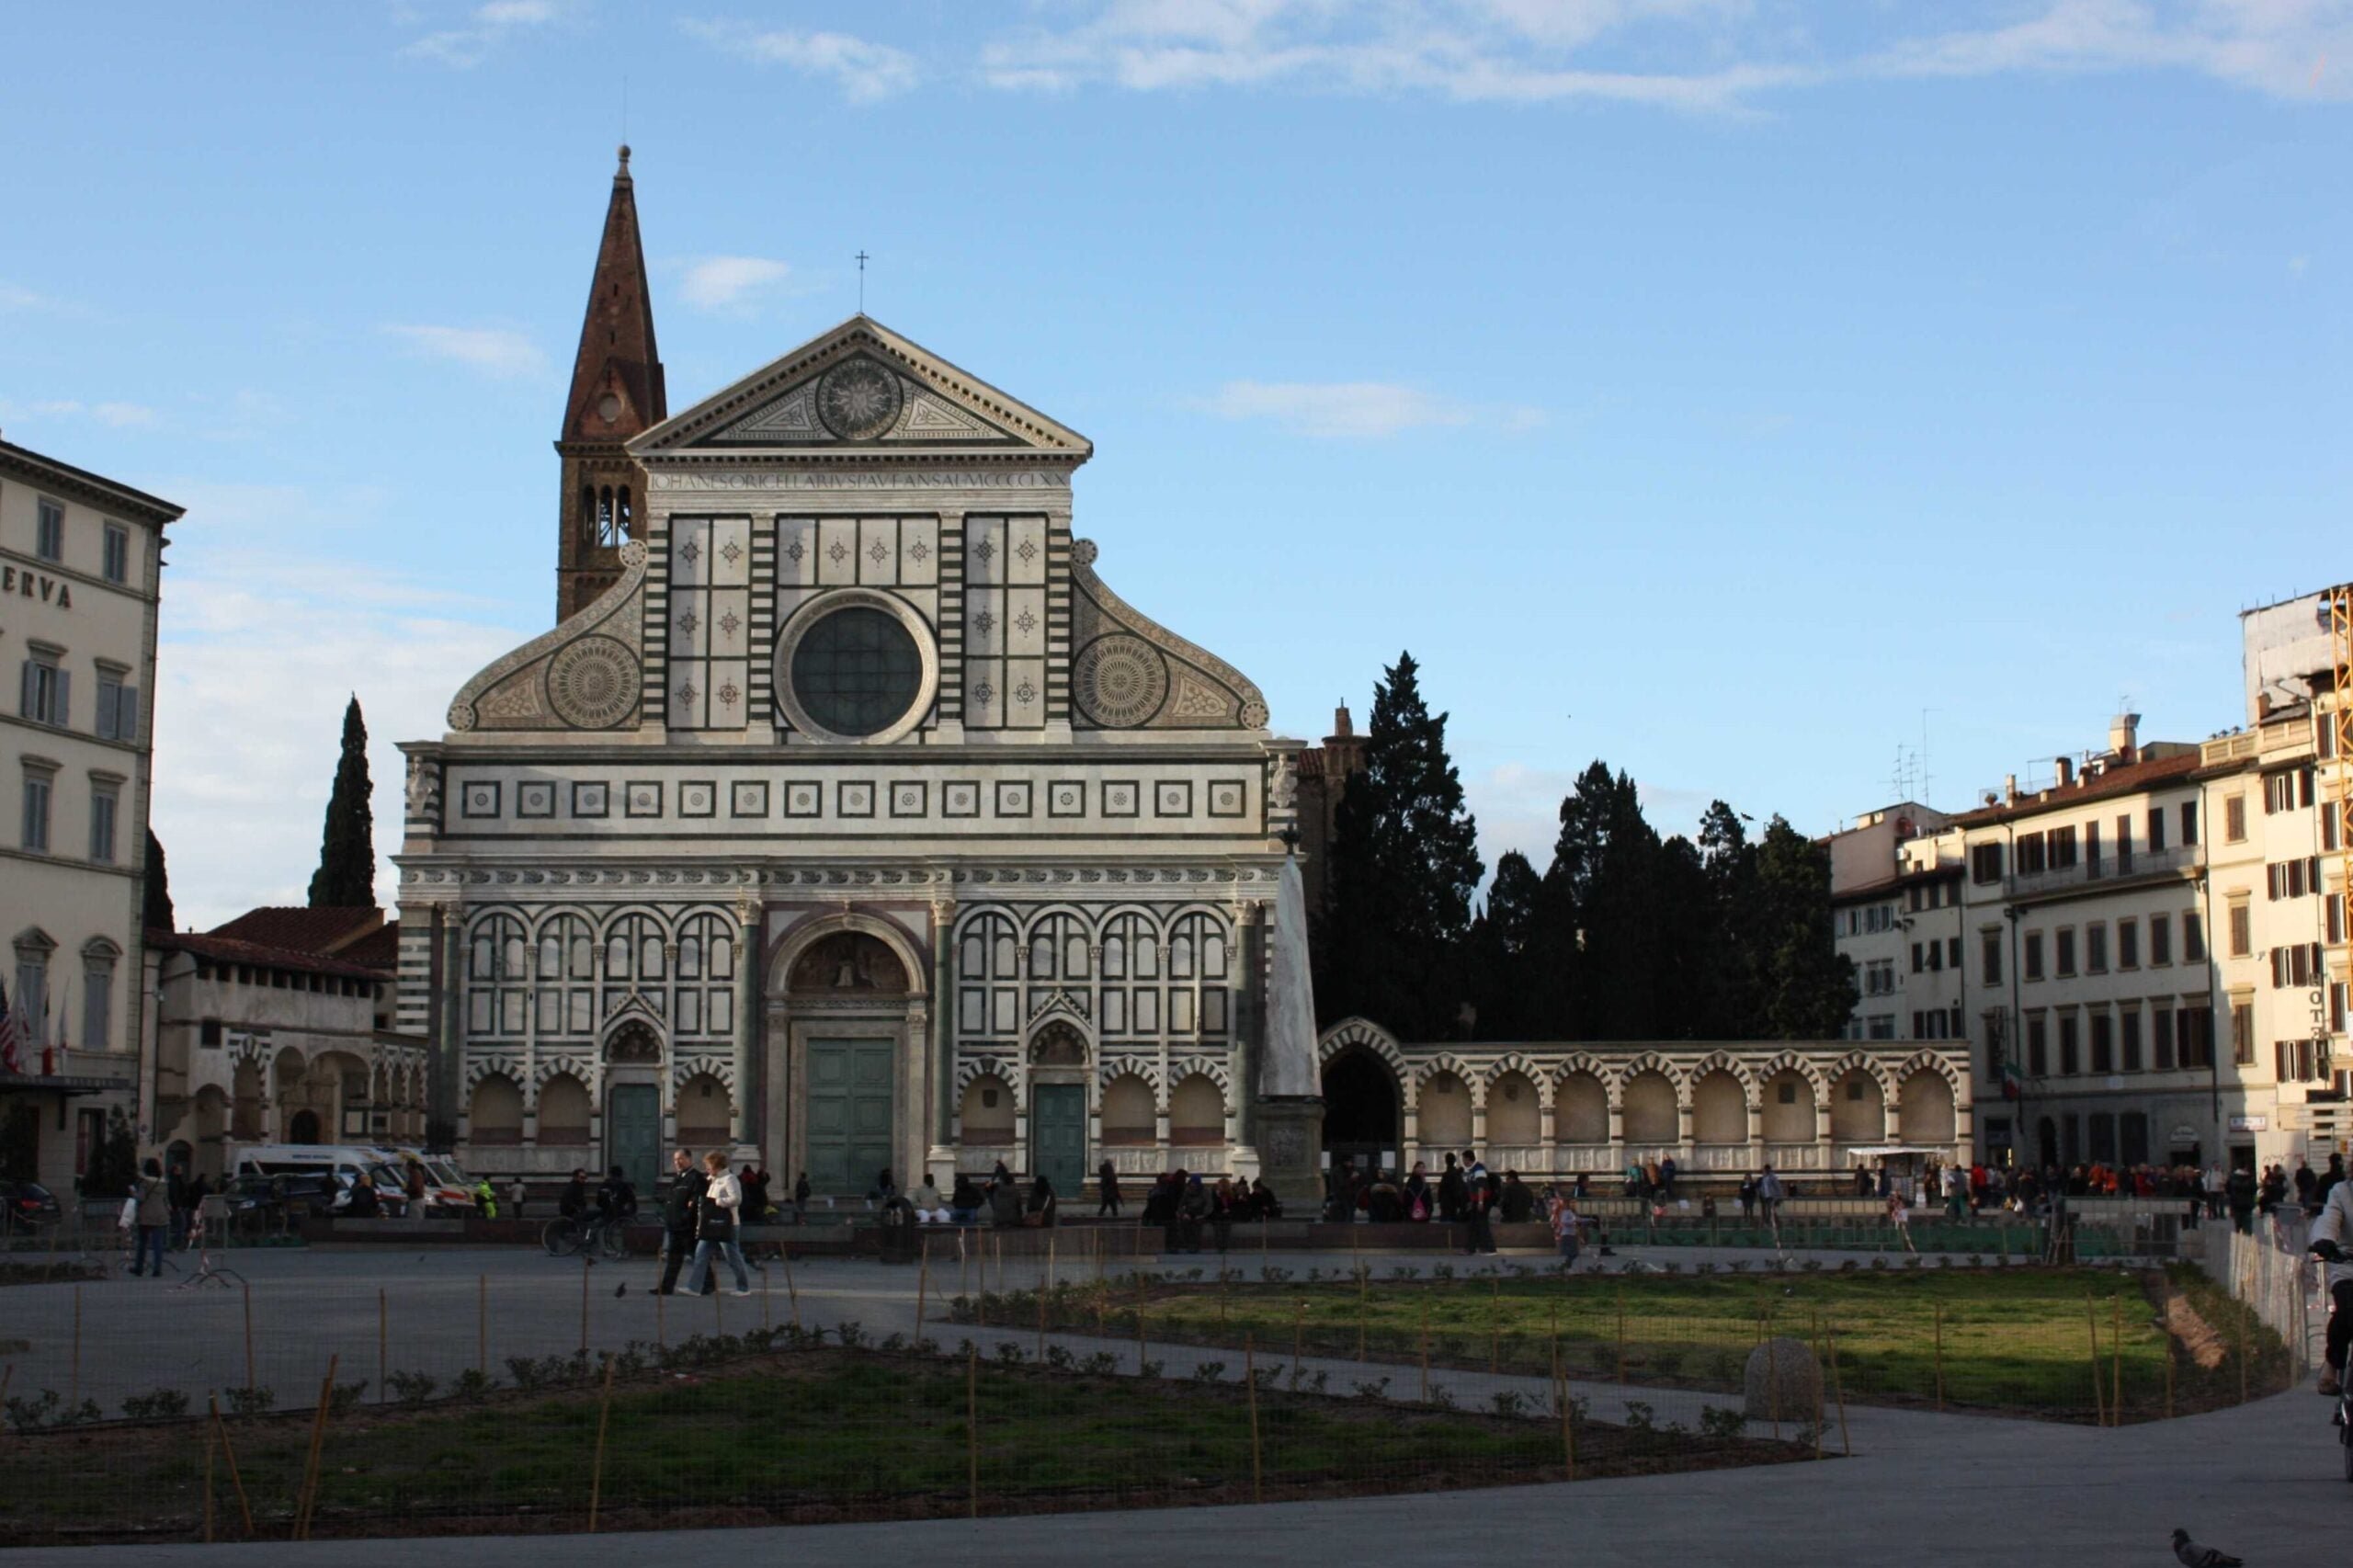 Renaissance basilica of Santa Maria Novella bathed in sunlight with pedestrians walking in front.